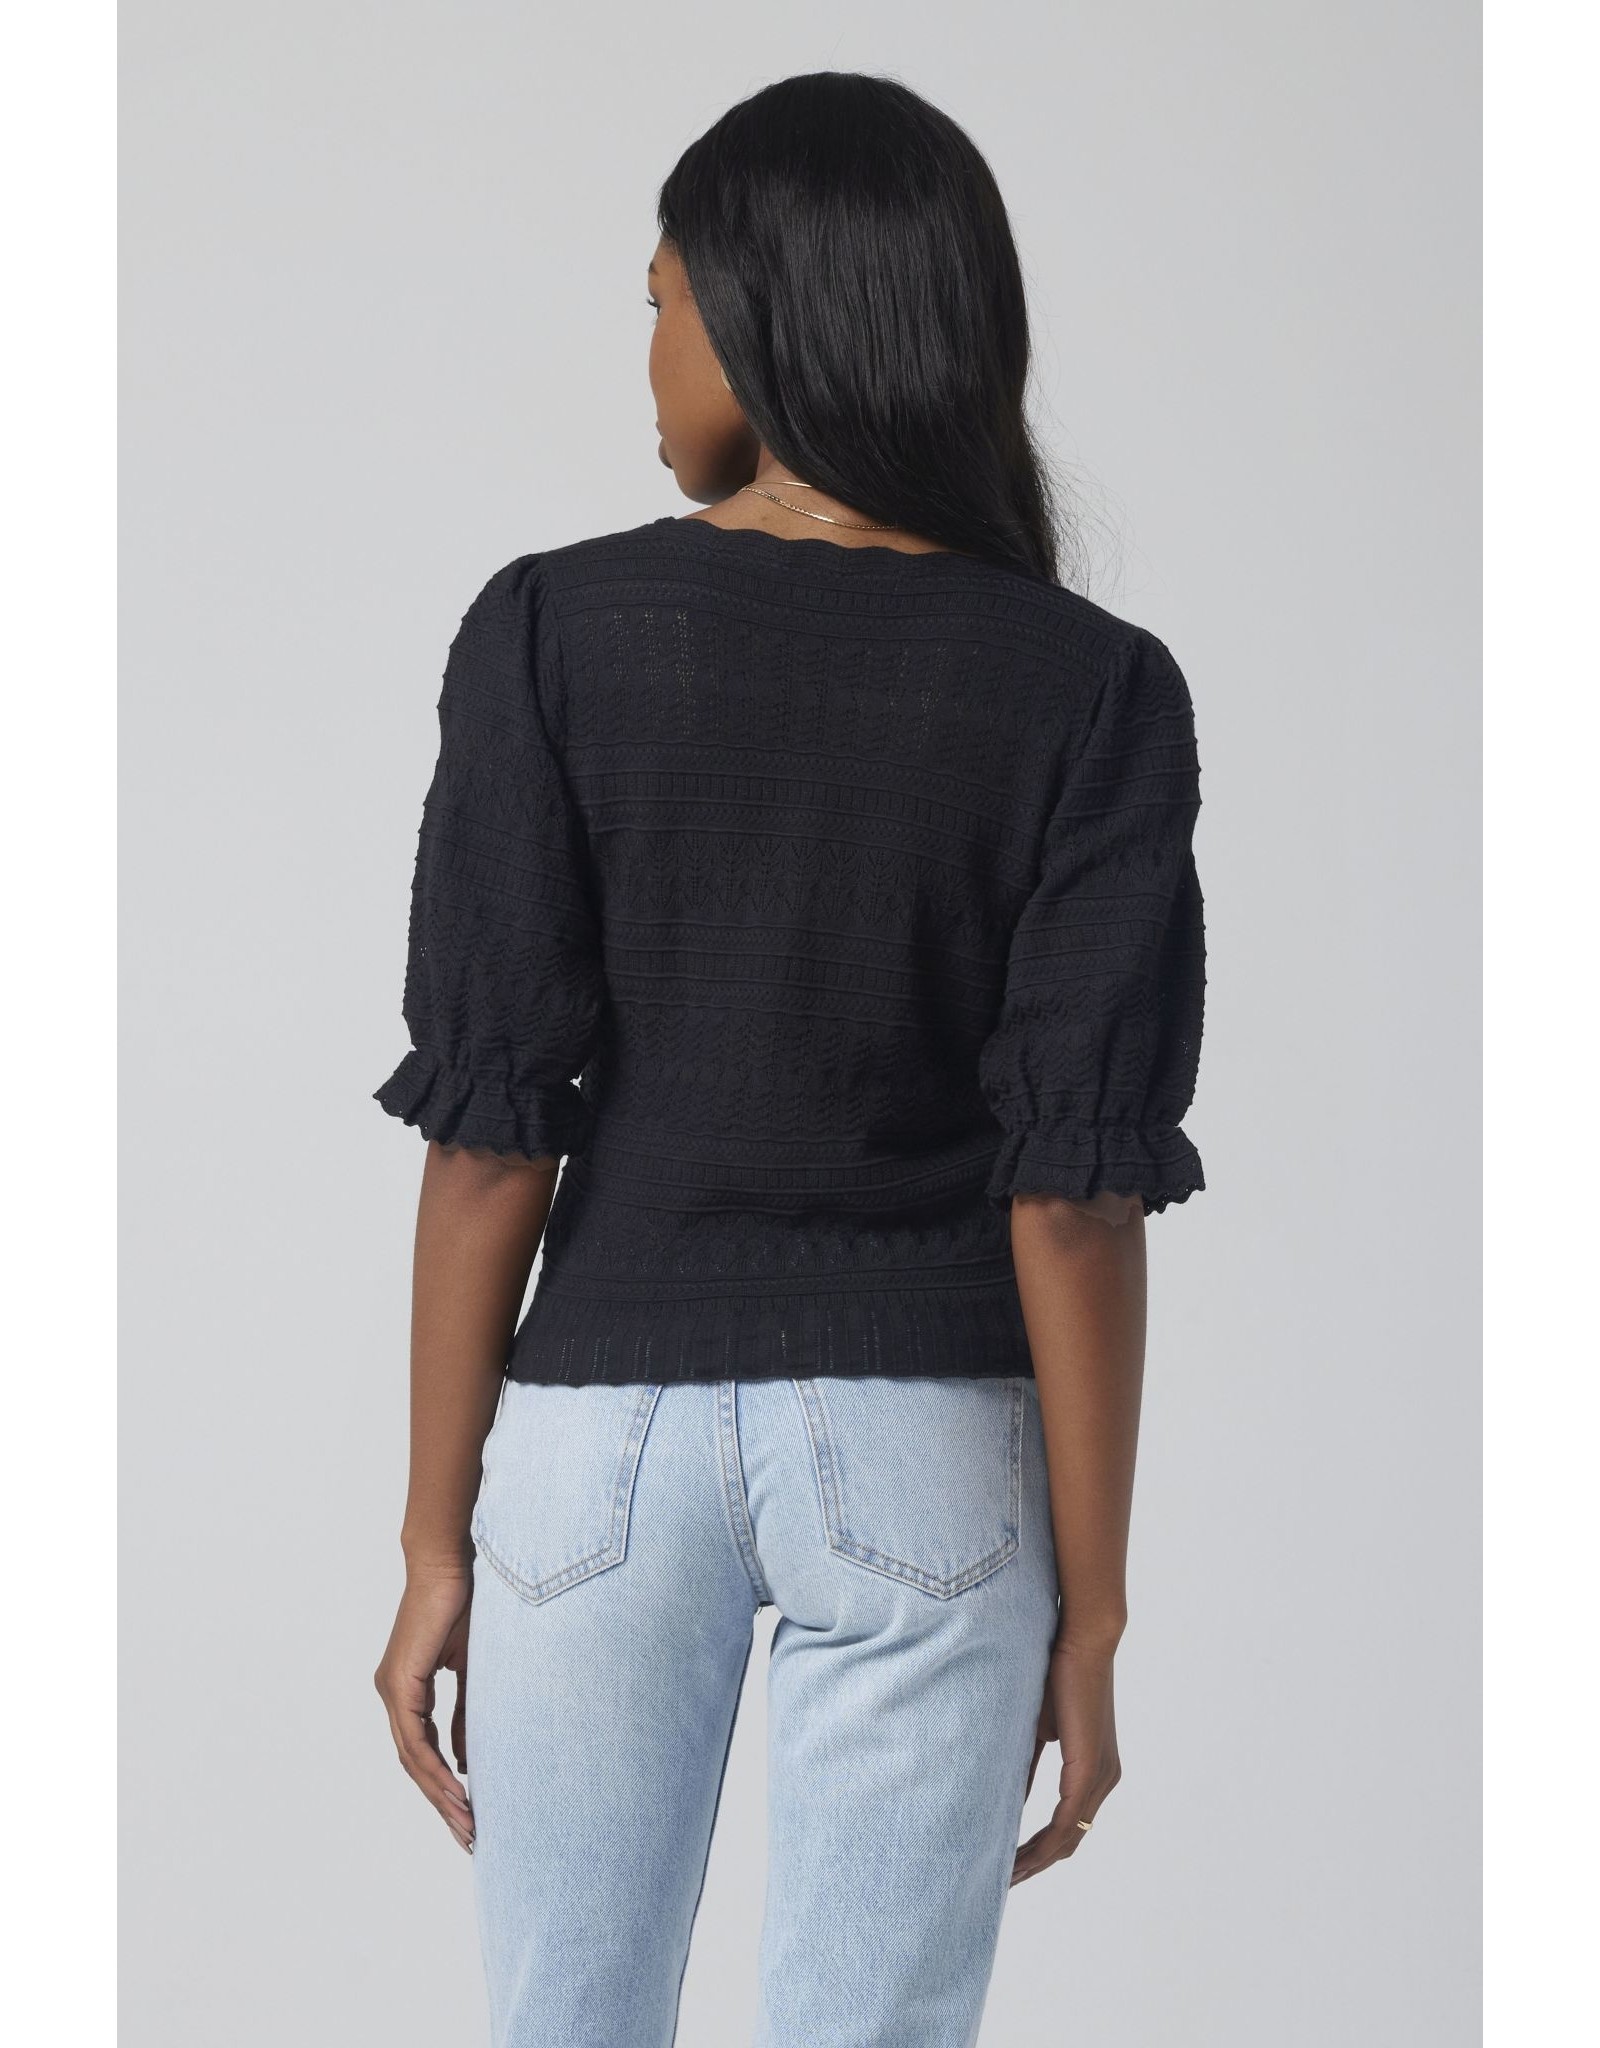 Saltwater luxe SWL Black  S/S Sweater